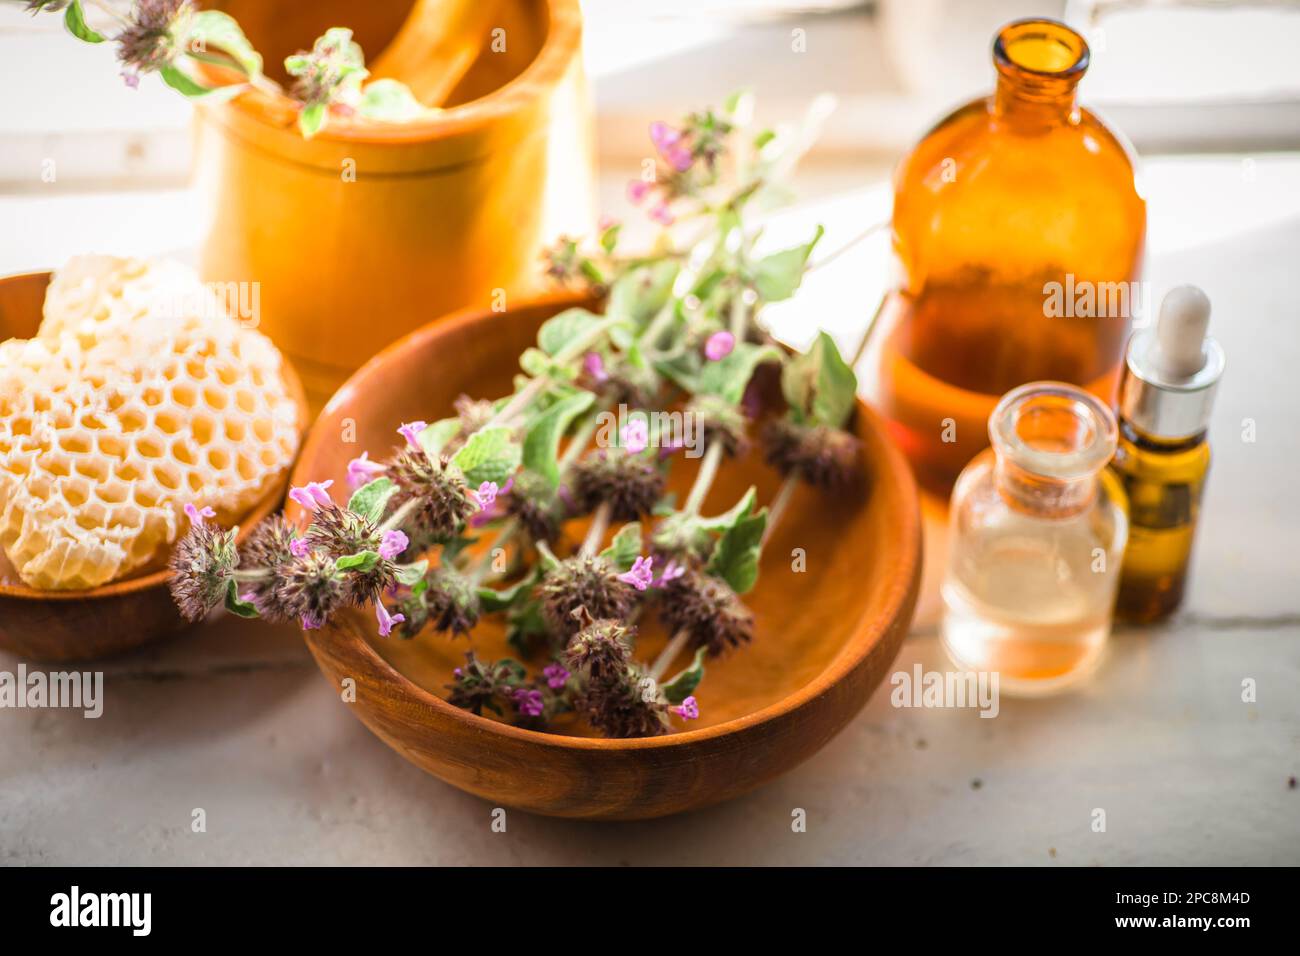 Apothecary bottles near raw materials from fresh flowering Clinopodium vulgare, Wild basil, rhizomatous perennial herb collected in ecologically clean Stock Photo